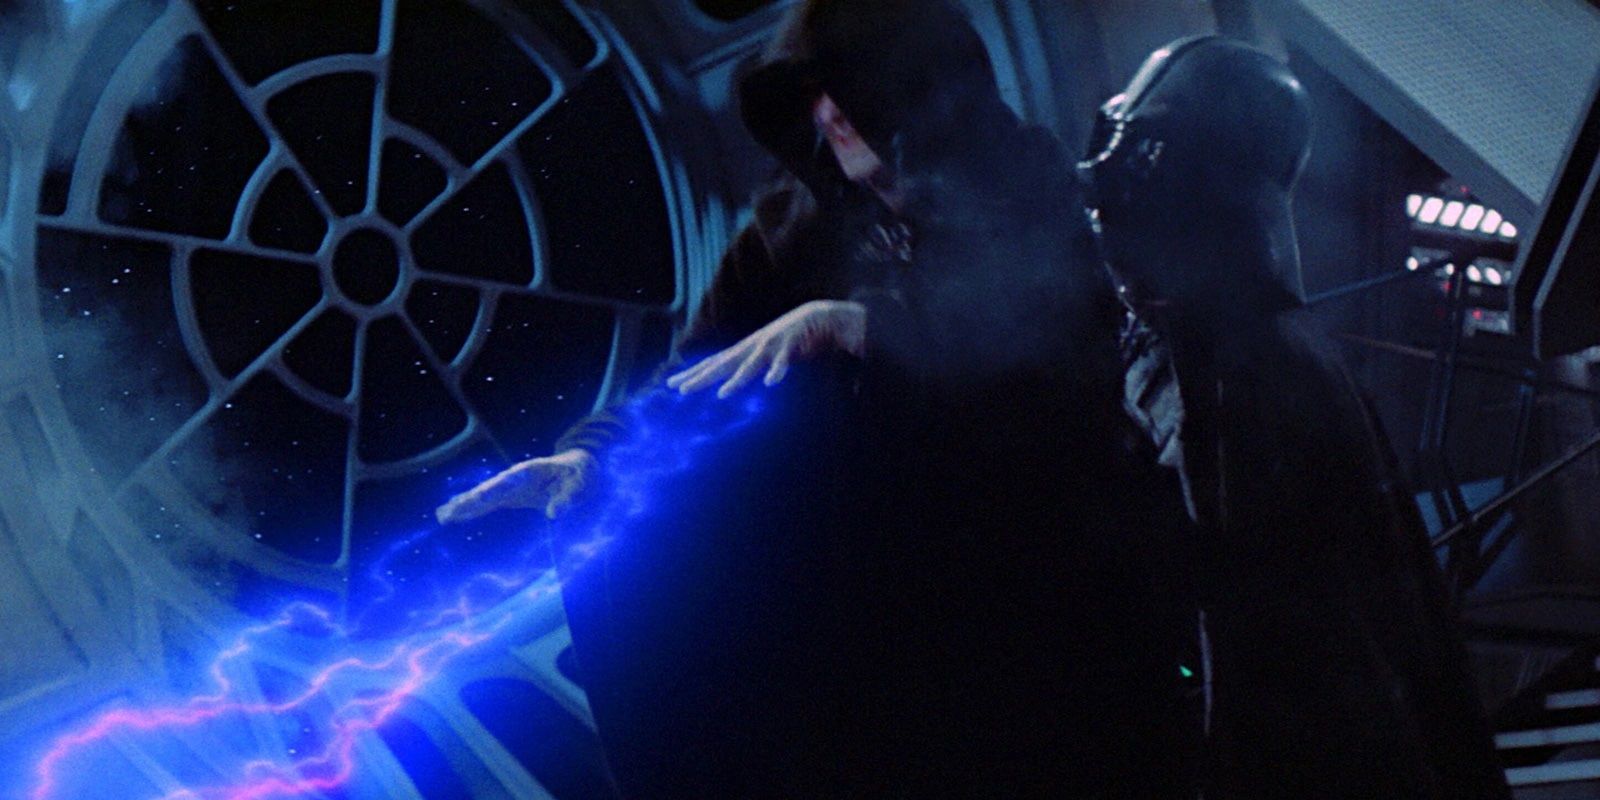 Palpatine's Contingency & Cloning Plan Prove He Secretly Feared Darth Vader (Not The Rebellion)